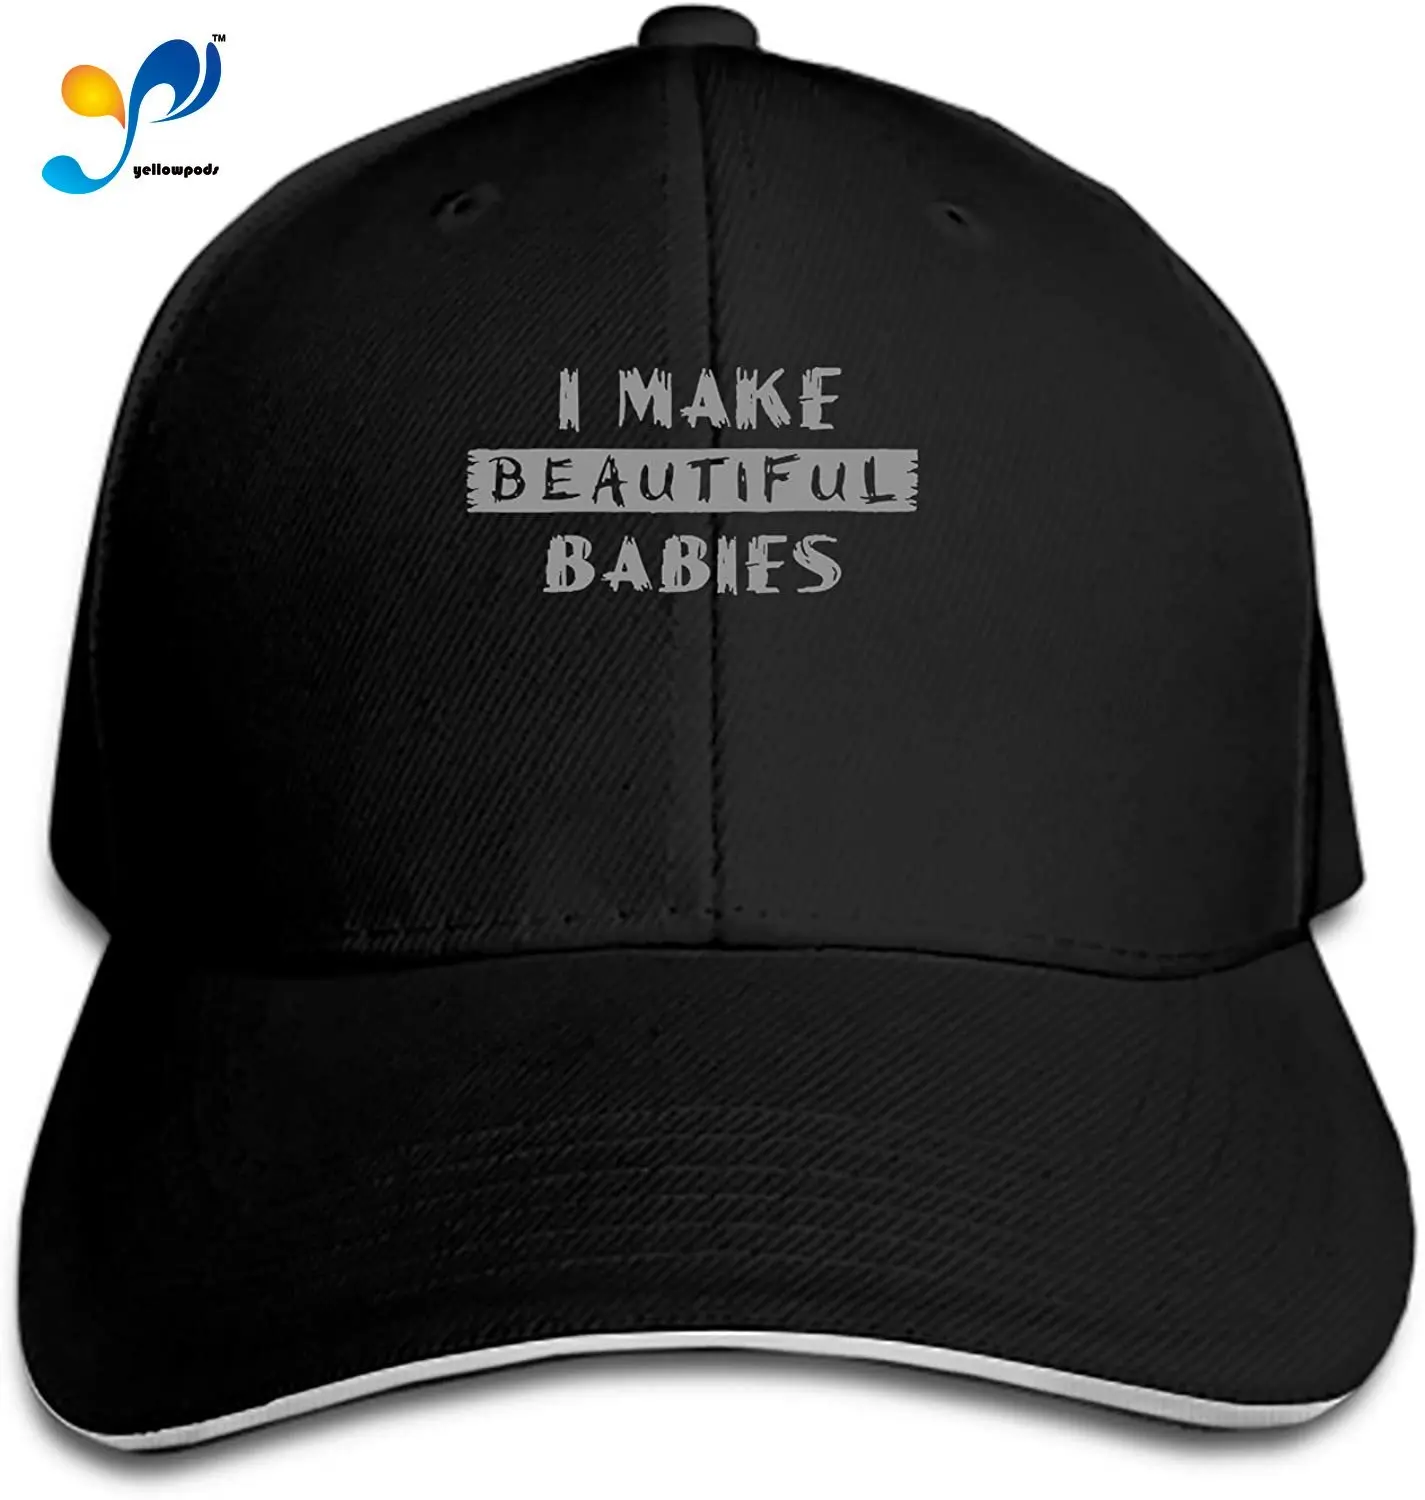 

I Make Beautiful Babies Funny Men's Structured Twill Cap Adjustable Peaked Sandwich Hat